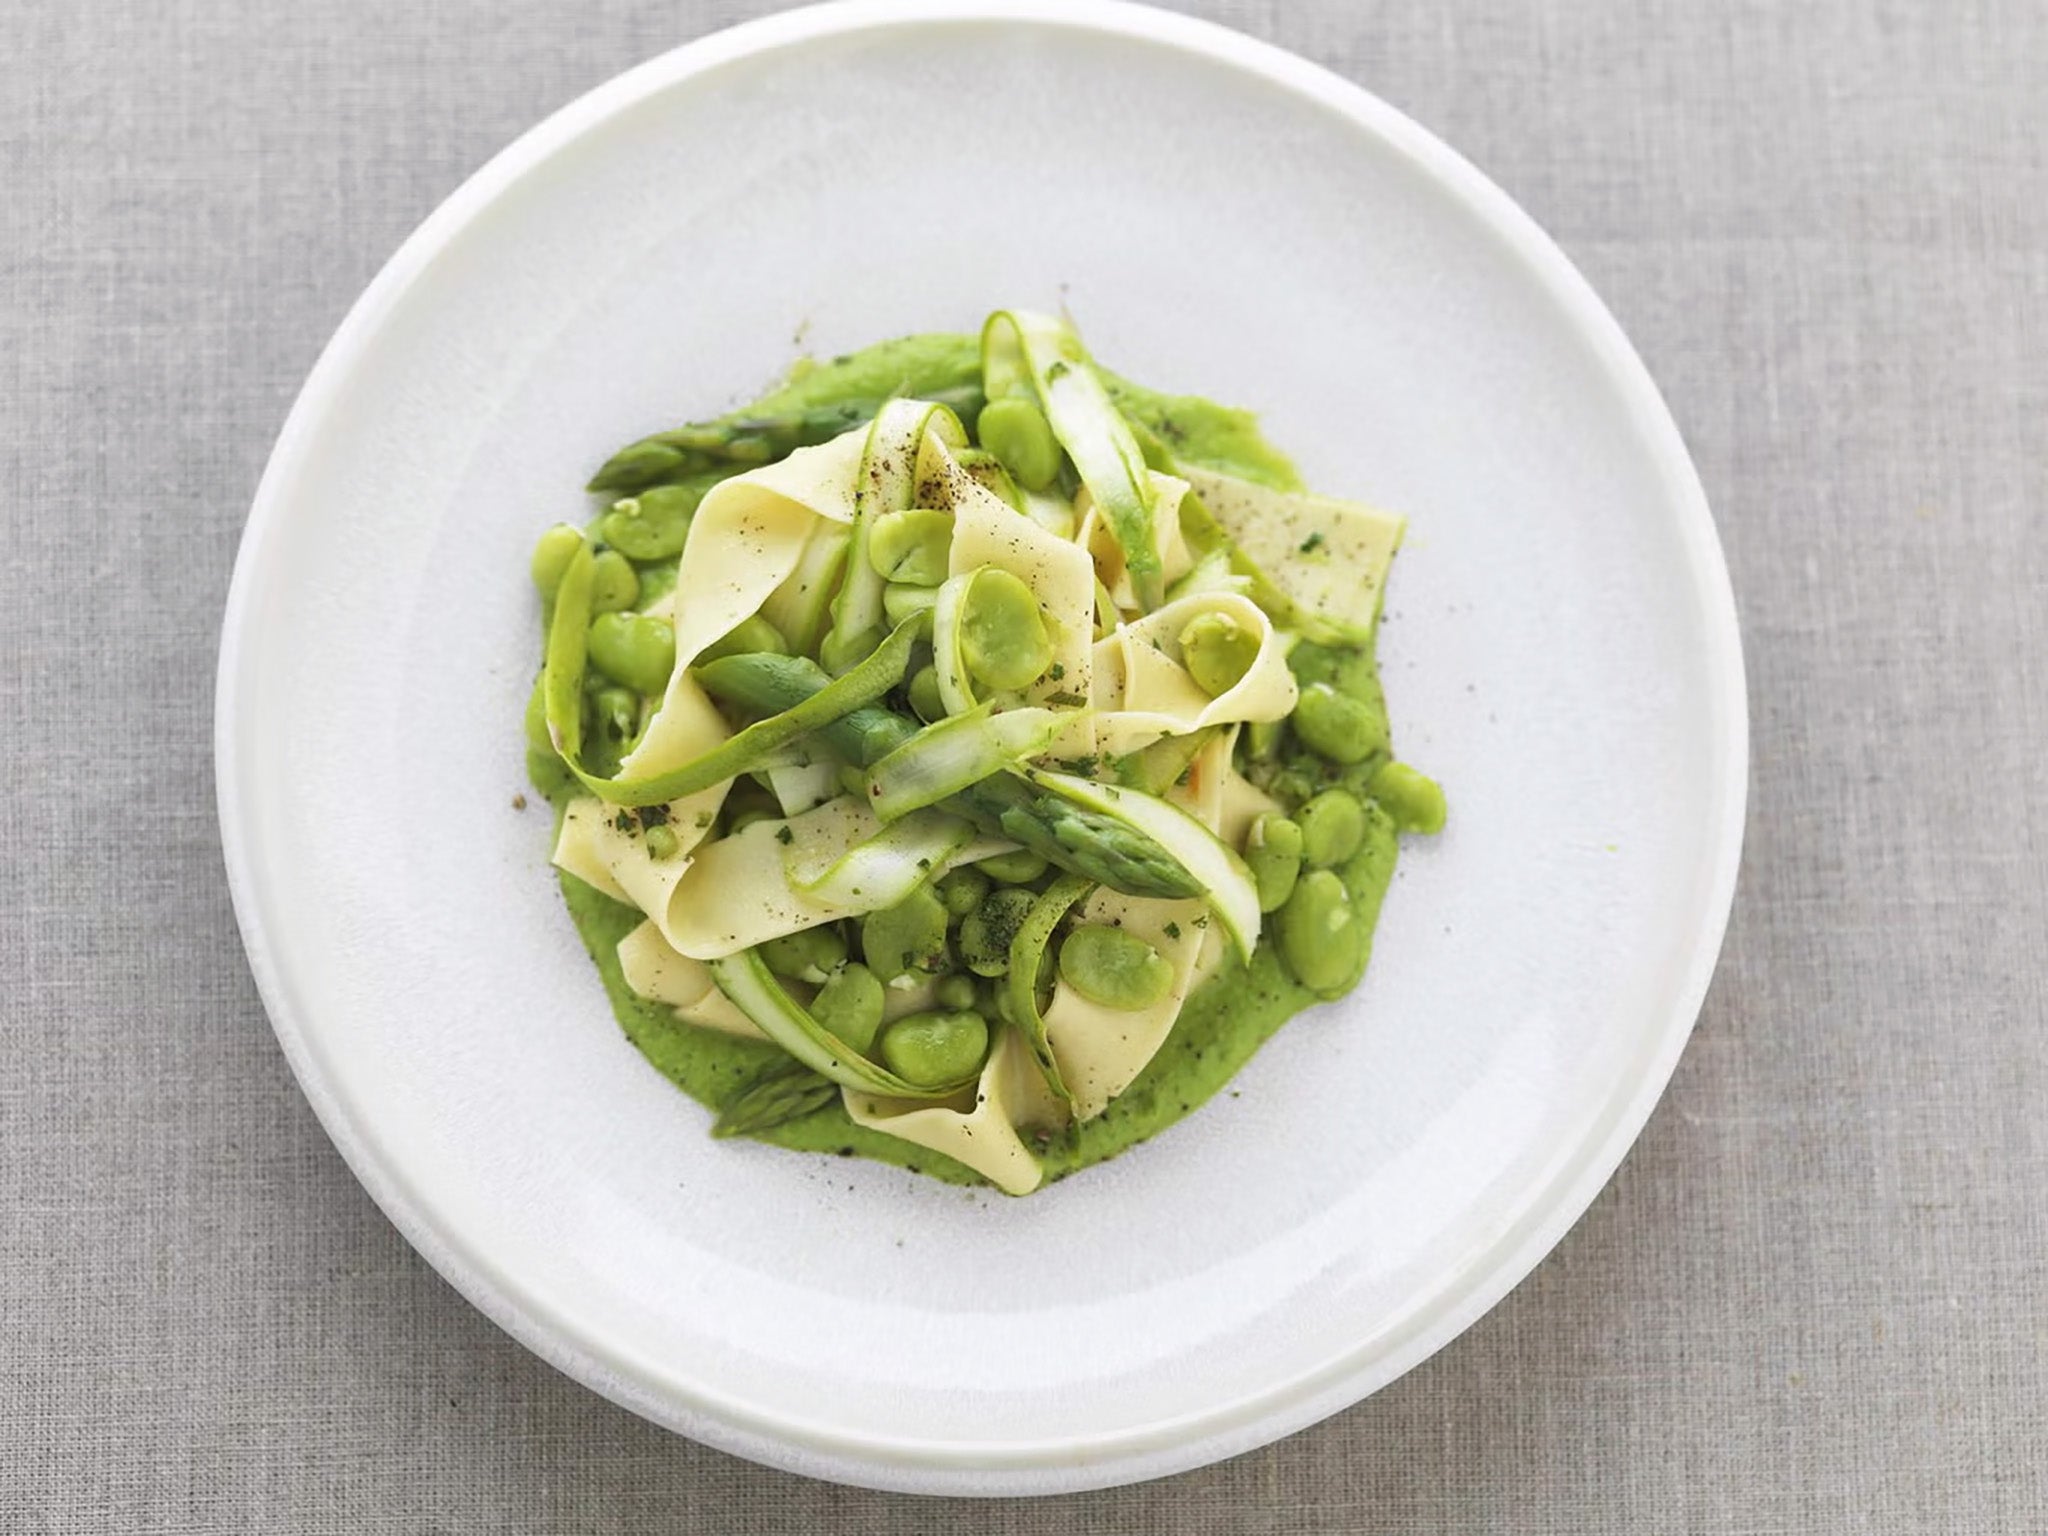 This pasta dish is a perfect way to celebrate the days of early summer